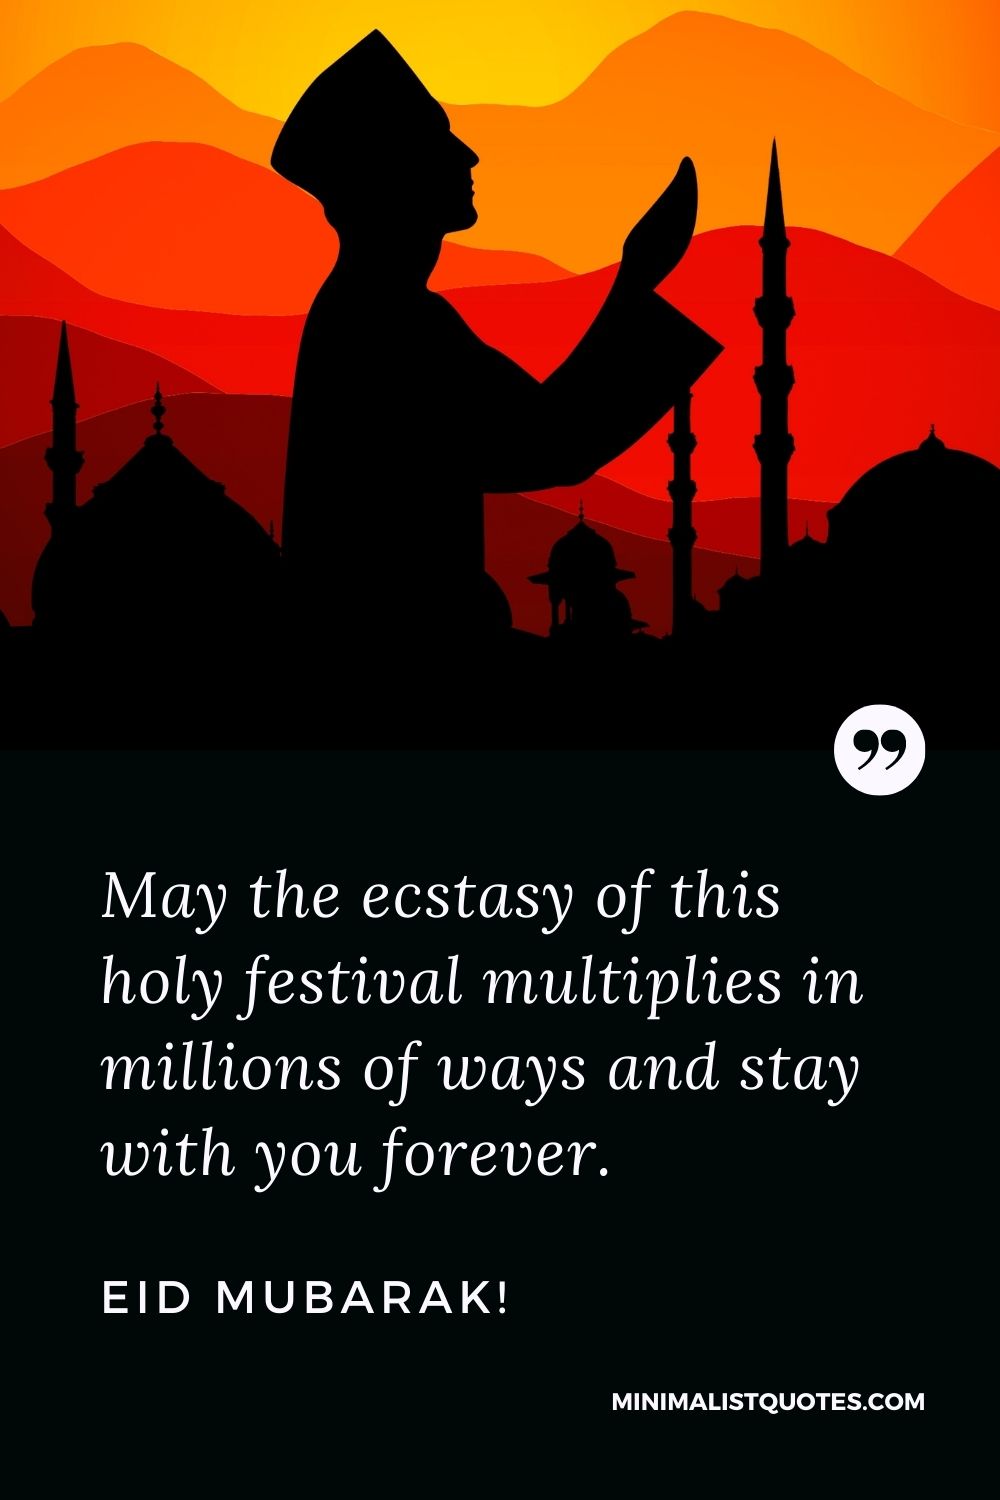 Eid al-Fitr Quote, Wish & Message With Image: May the ecstasy of this holy festival multiplies in millions of ways and stay with you forever. Eid Mubarak!